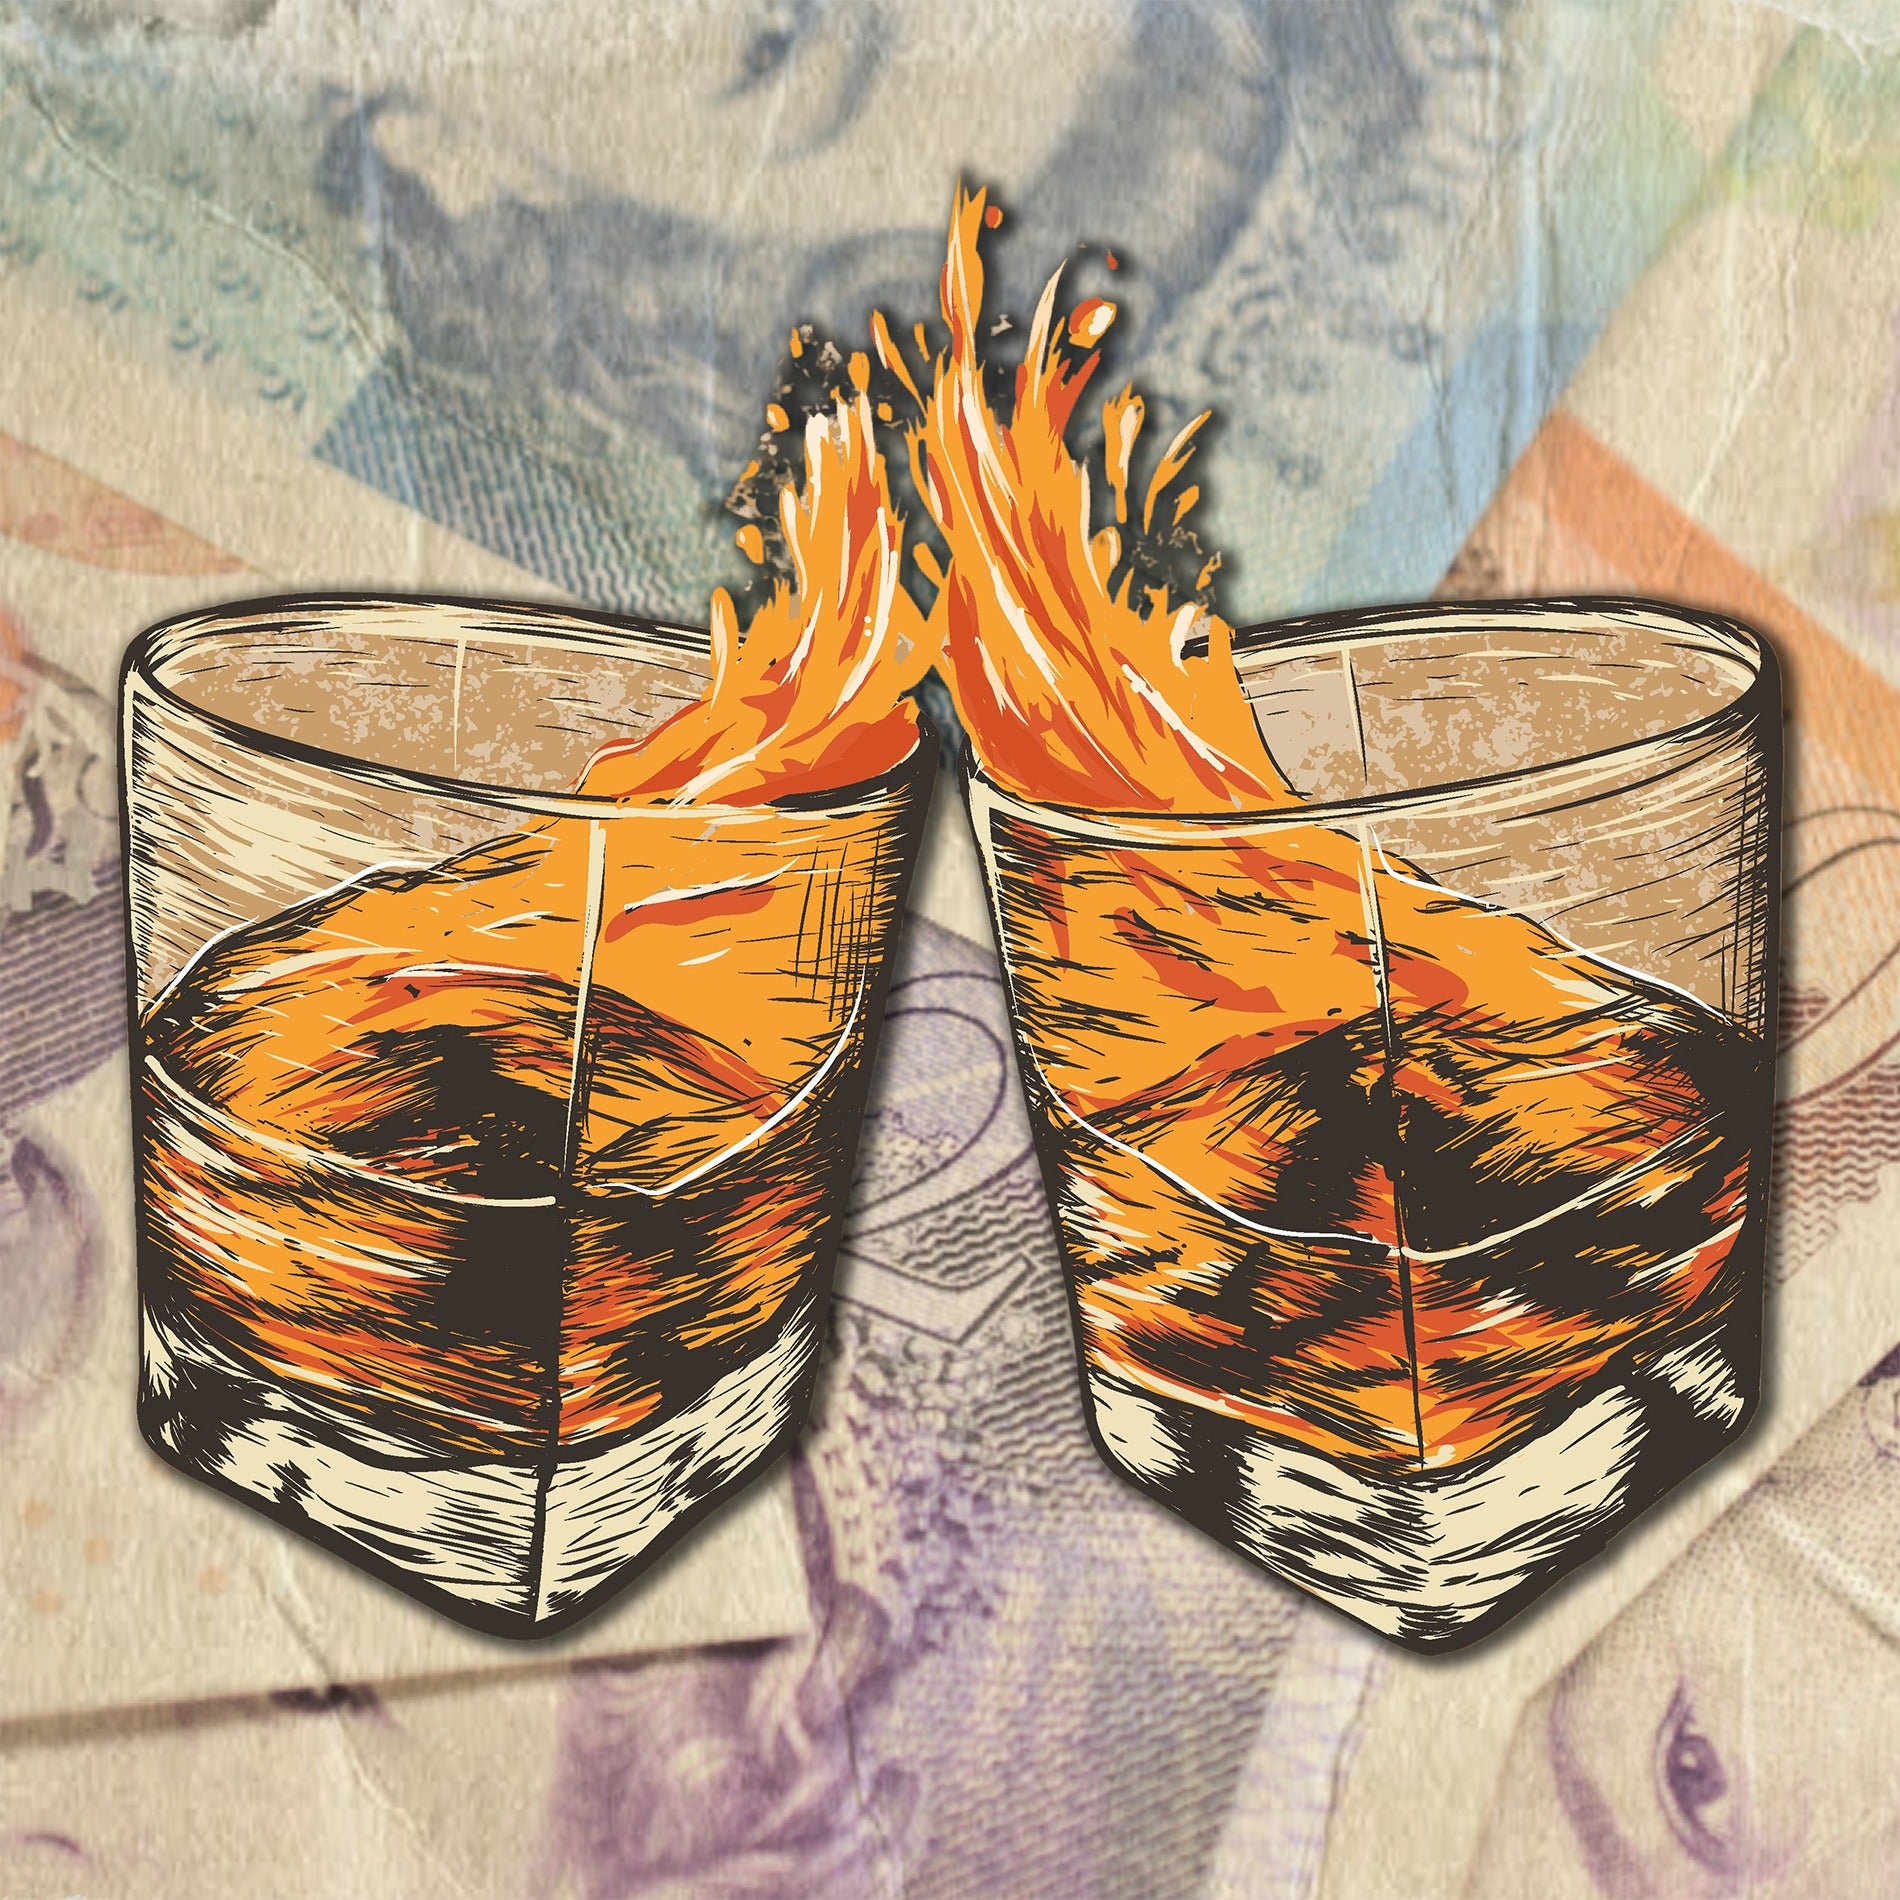 Whisky pros reveal how to avoid investment scams